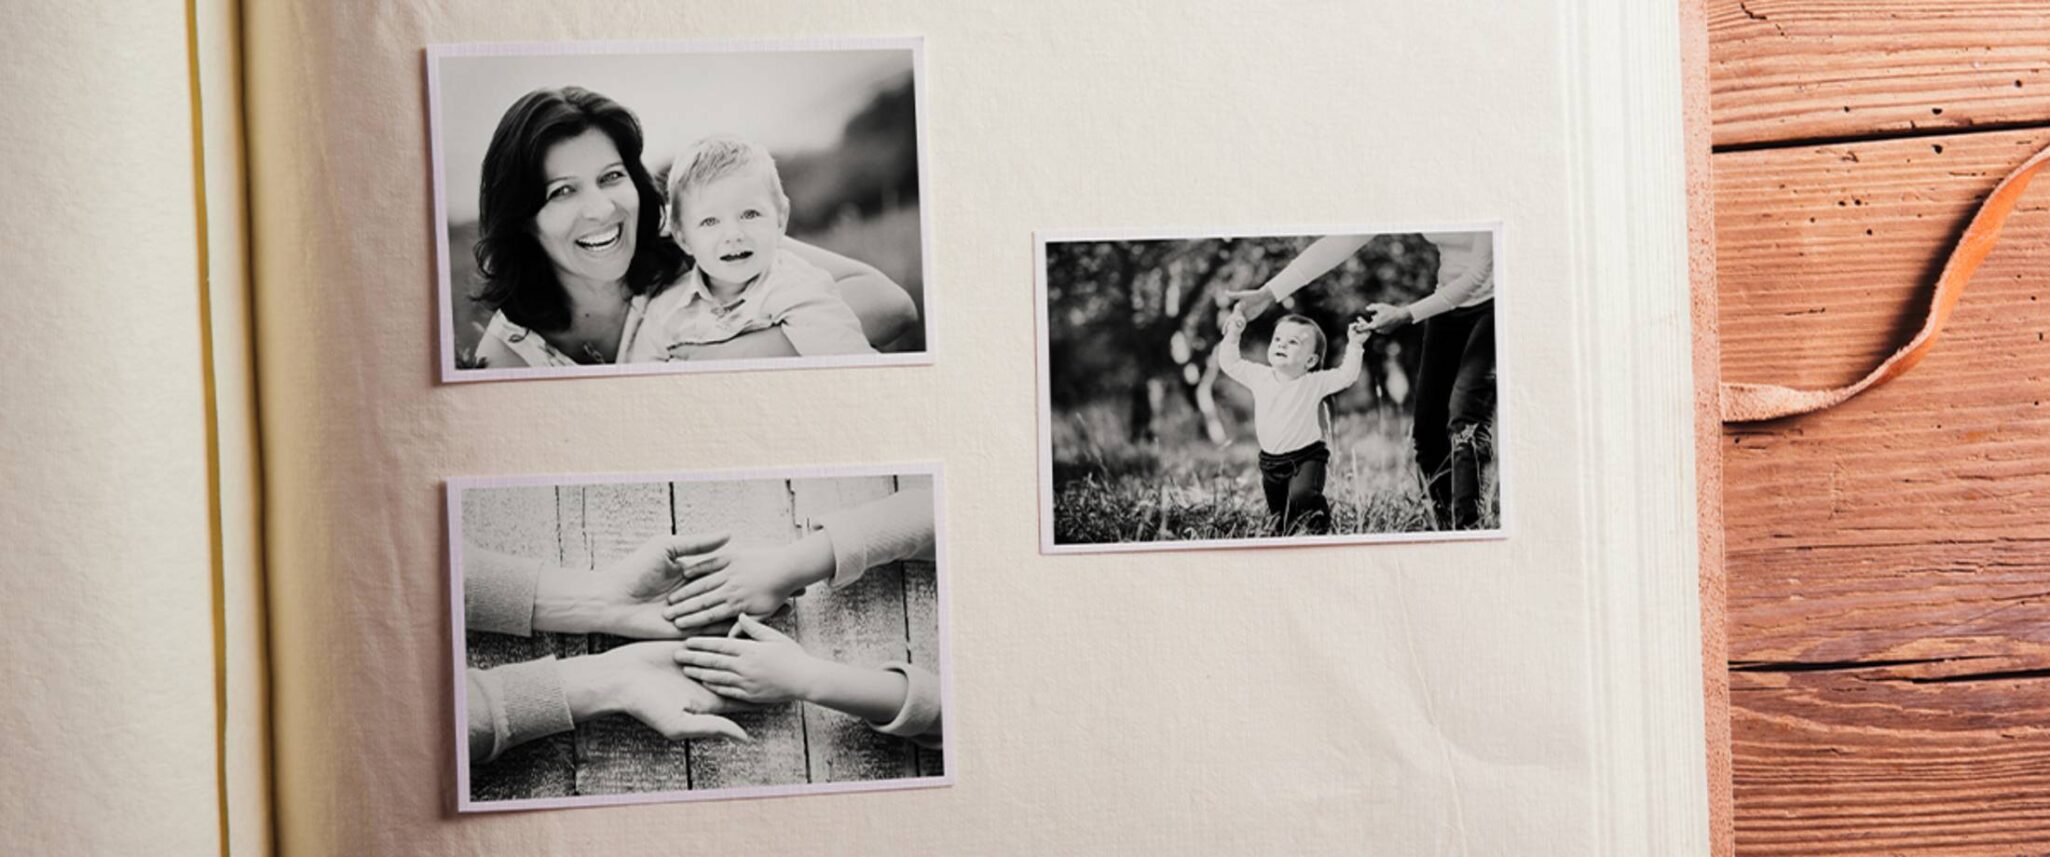 photo album featuring photos of a mom and child